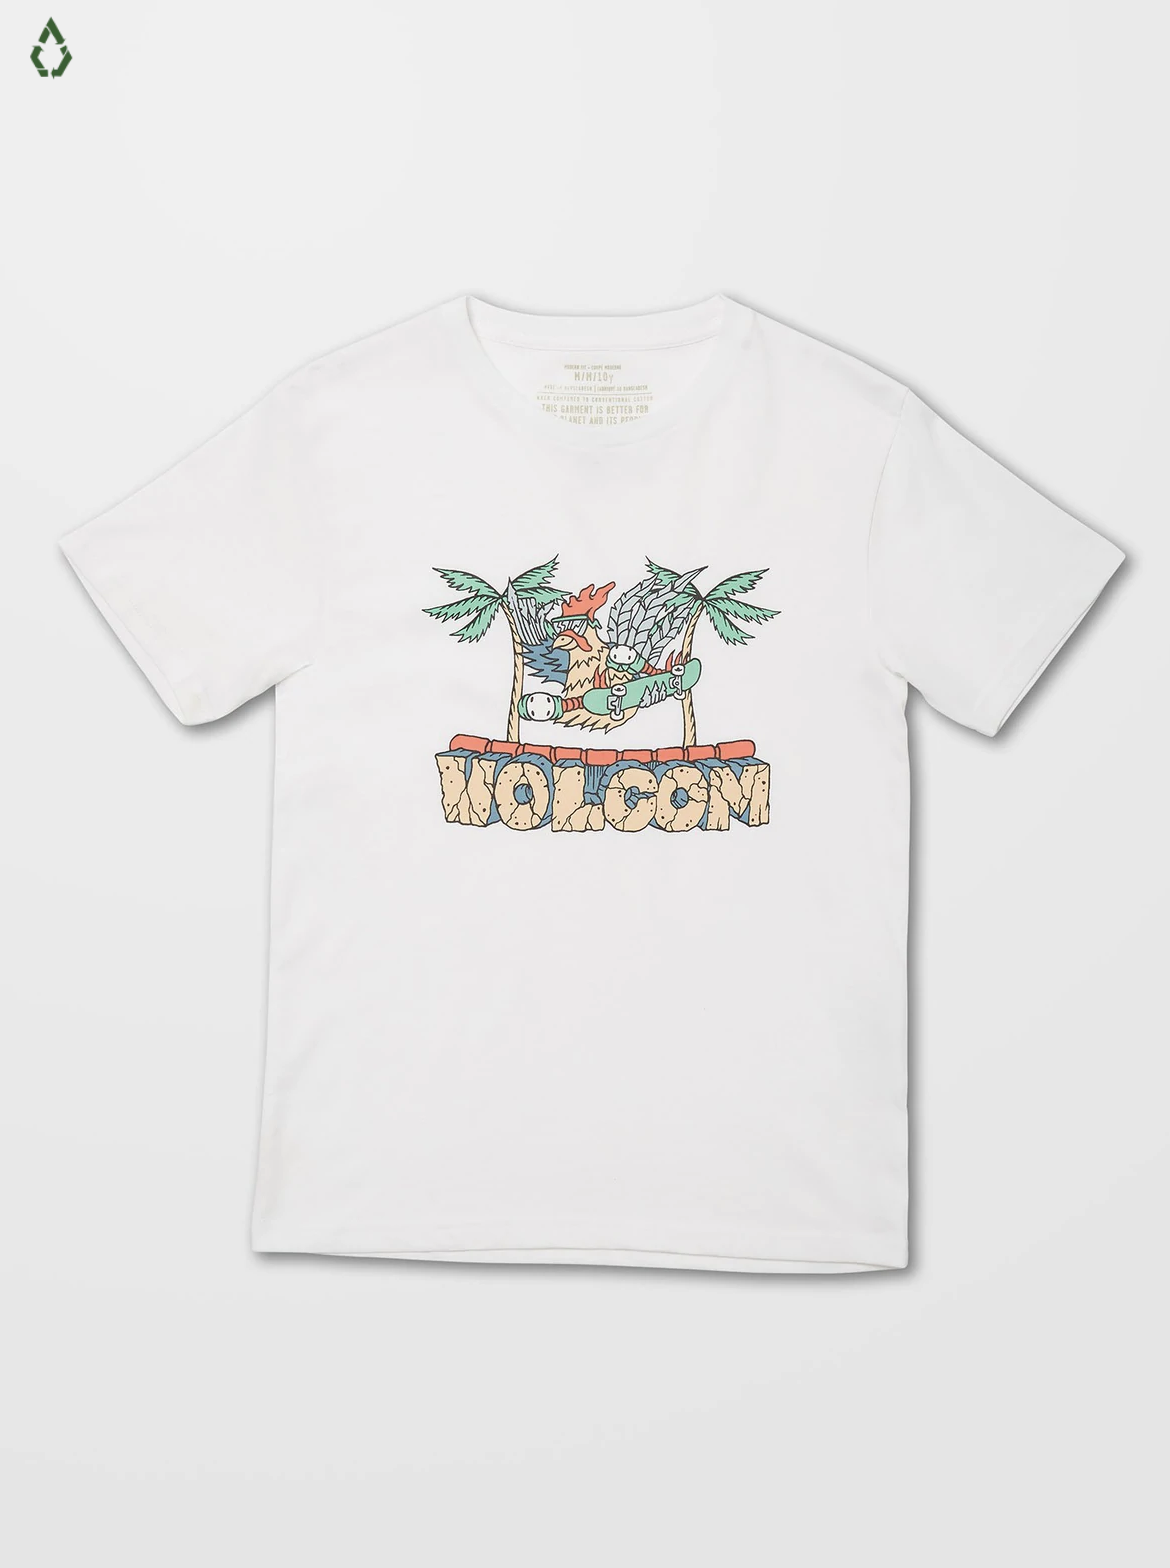 ROOSTING BSC SS WHITE VOLCOM